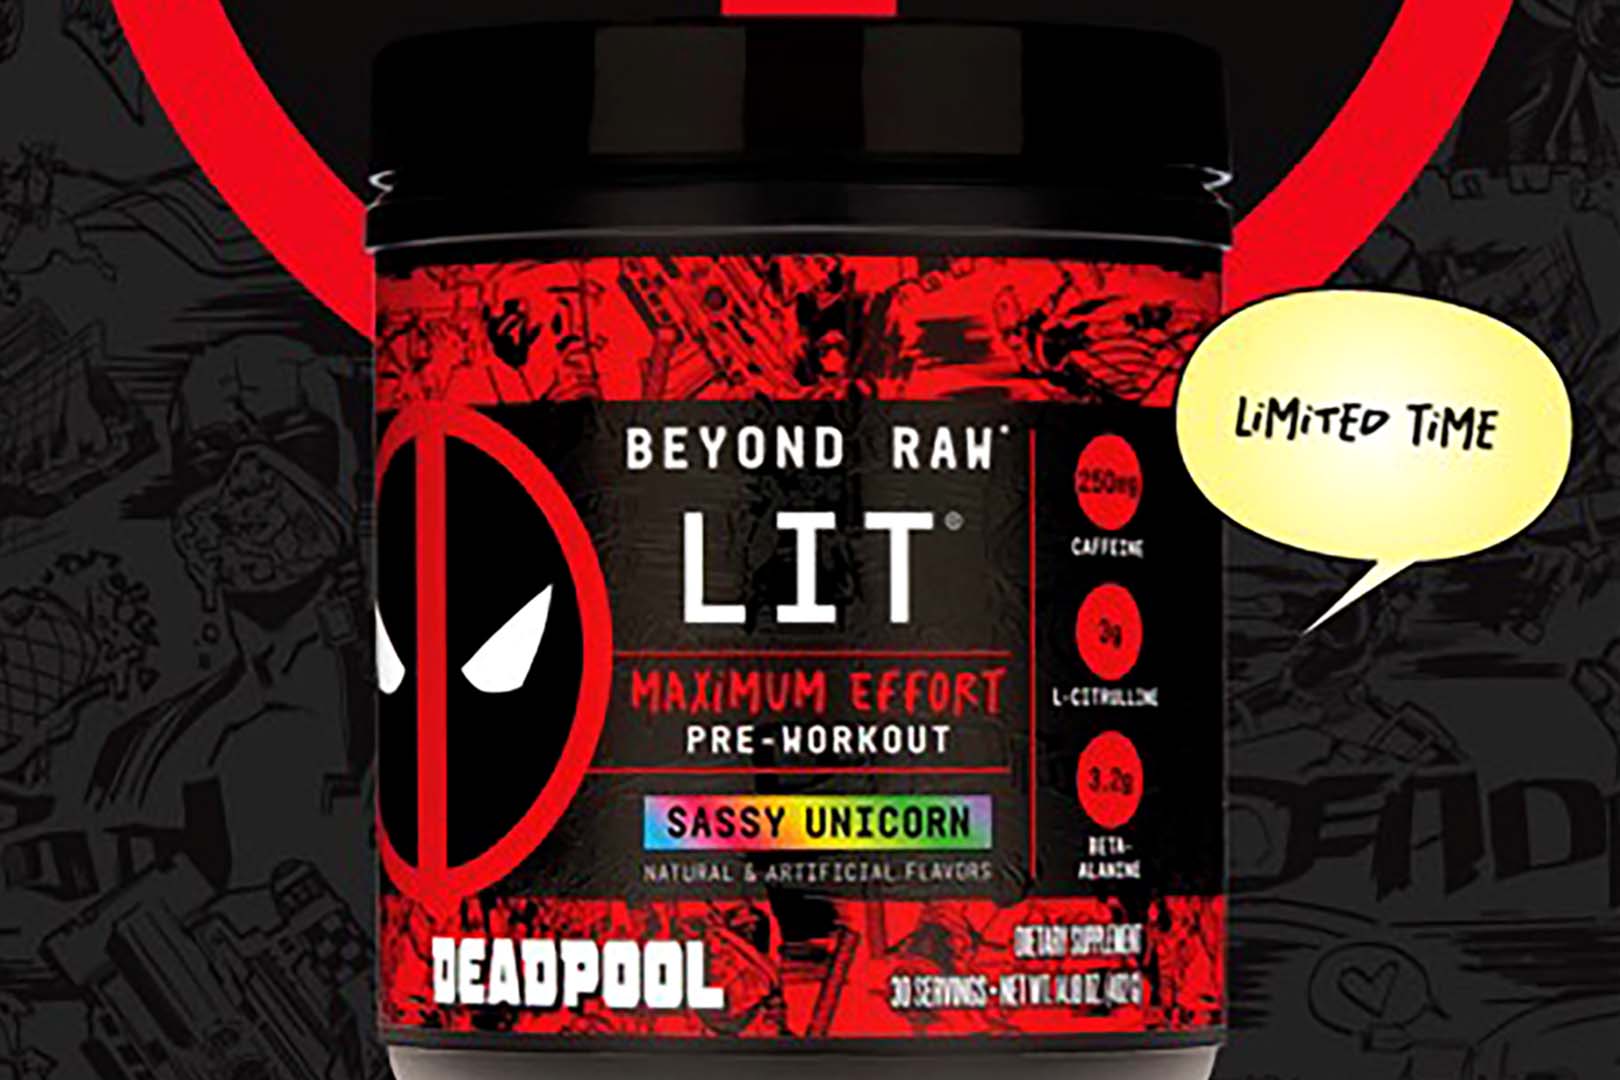 Beyond Raw drops a Deadpool flavor collaboration just in time for Deadpool & Wolverine